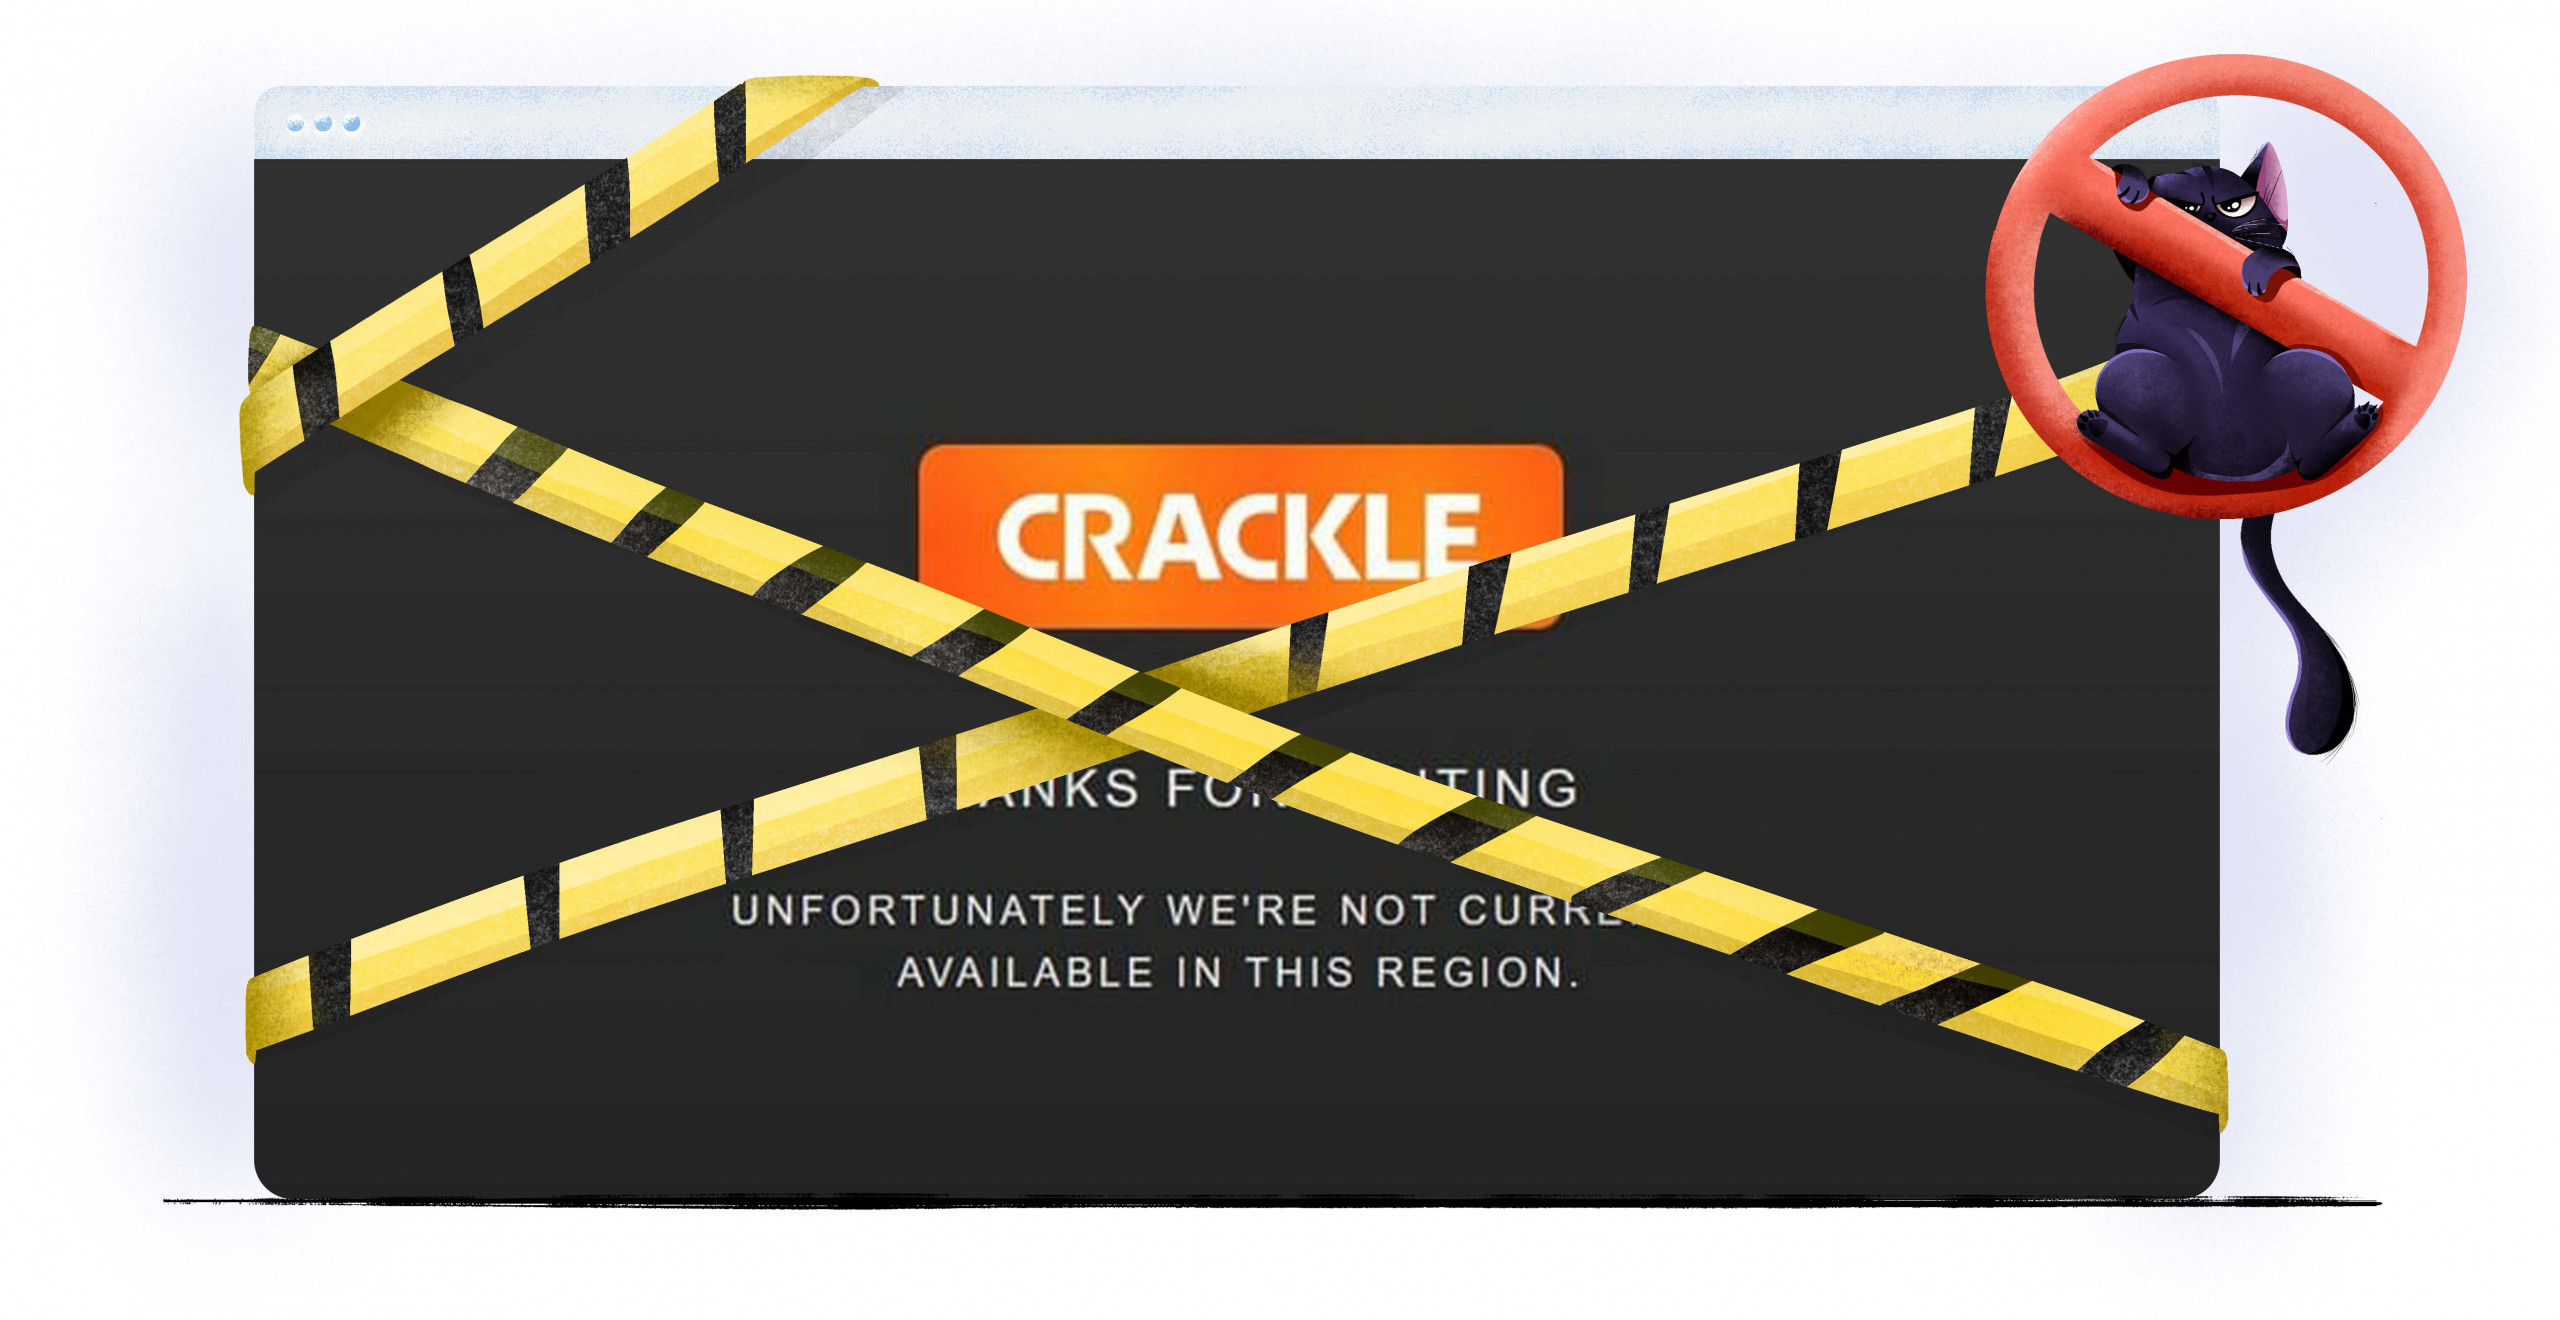 Crackle is blocked in India